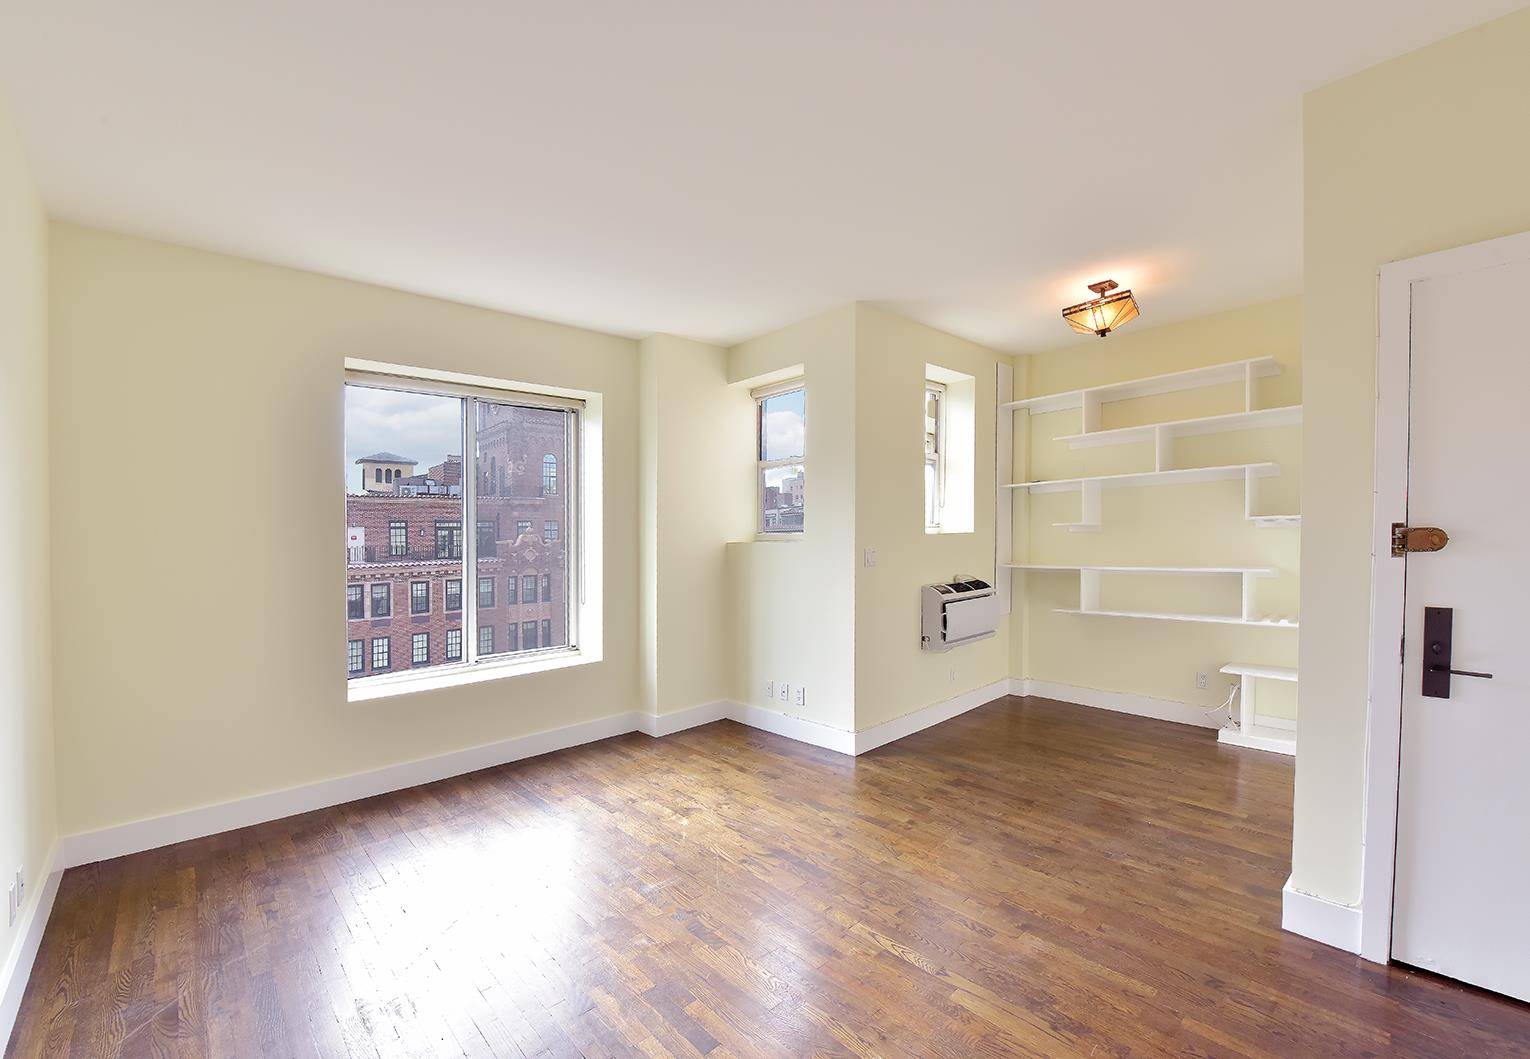 This renovated, pre war Greenwich Village 1 Bedroom apartment features open south, east and west exposures with amazing natural light and views of the Freedom Tower and Grace Church.